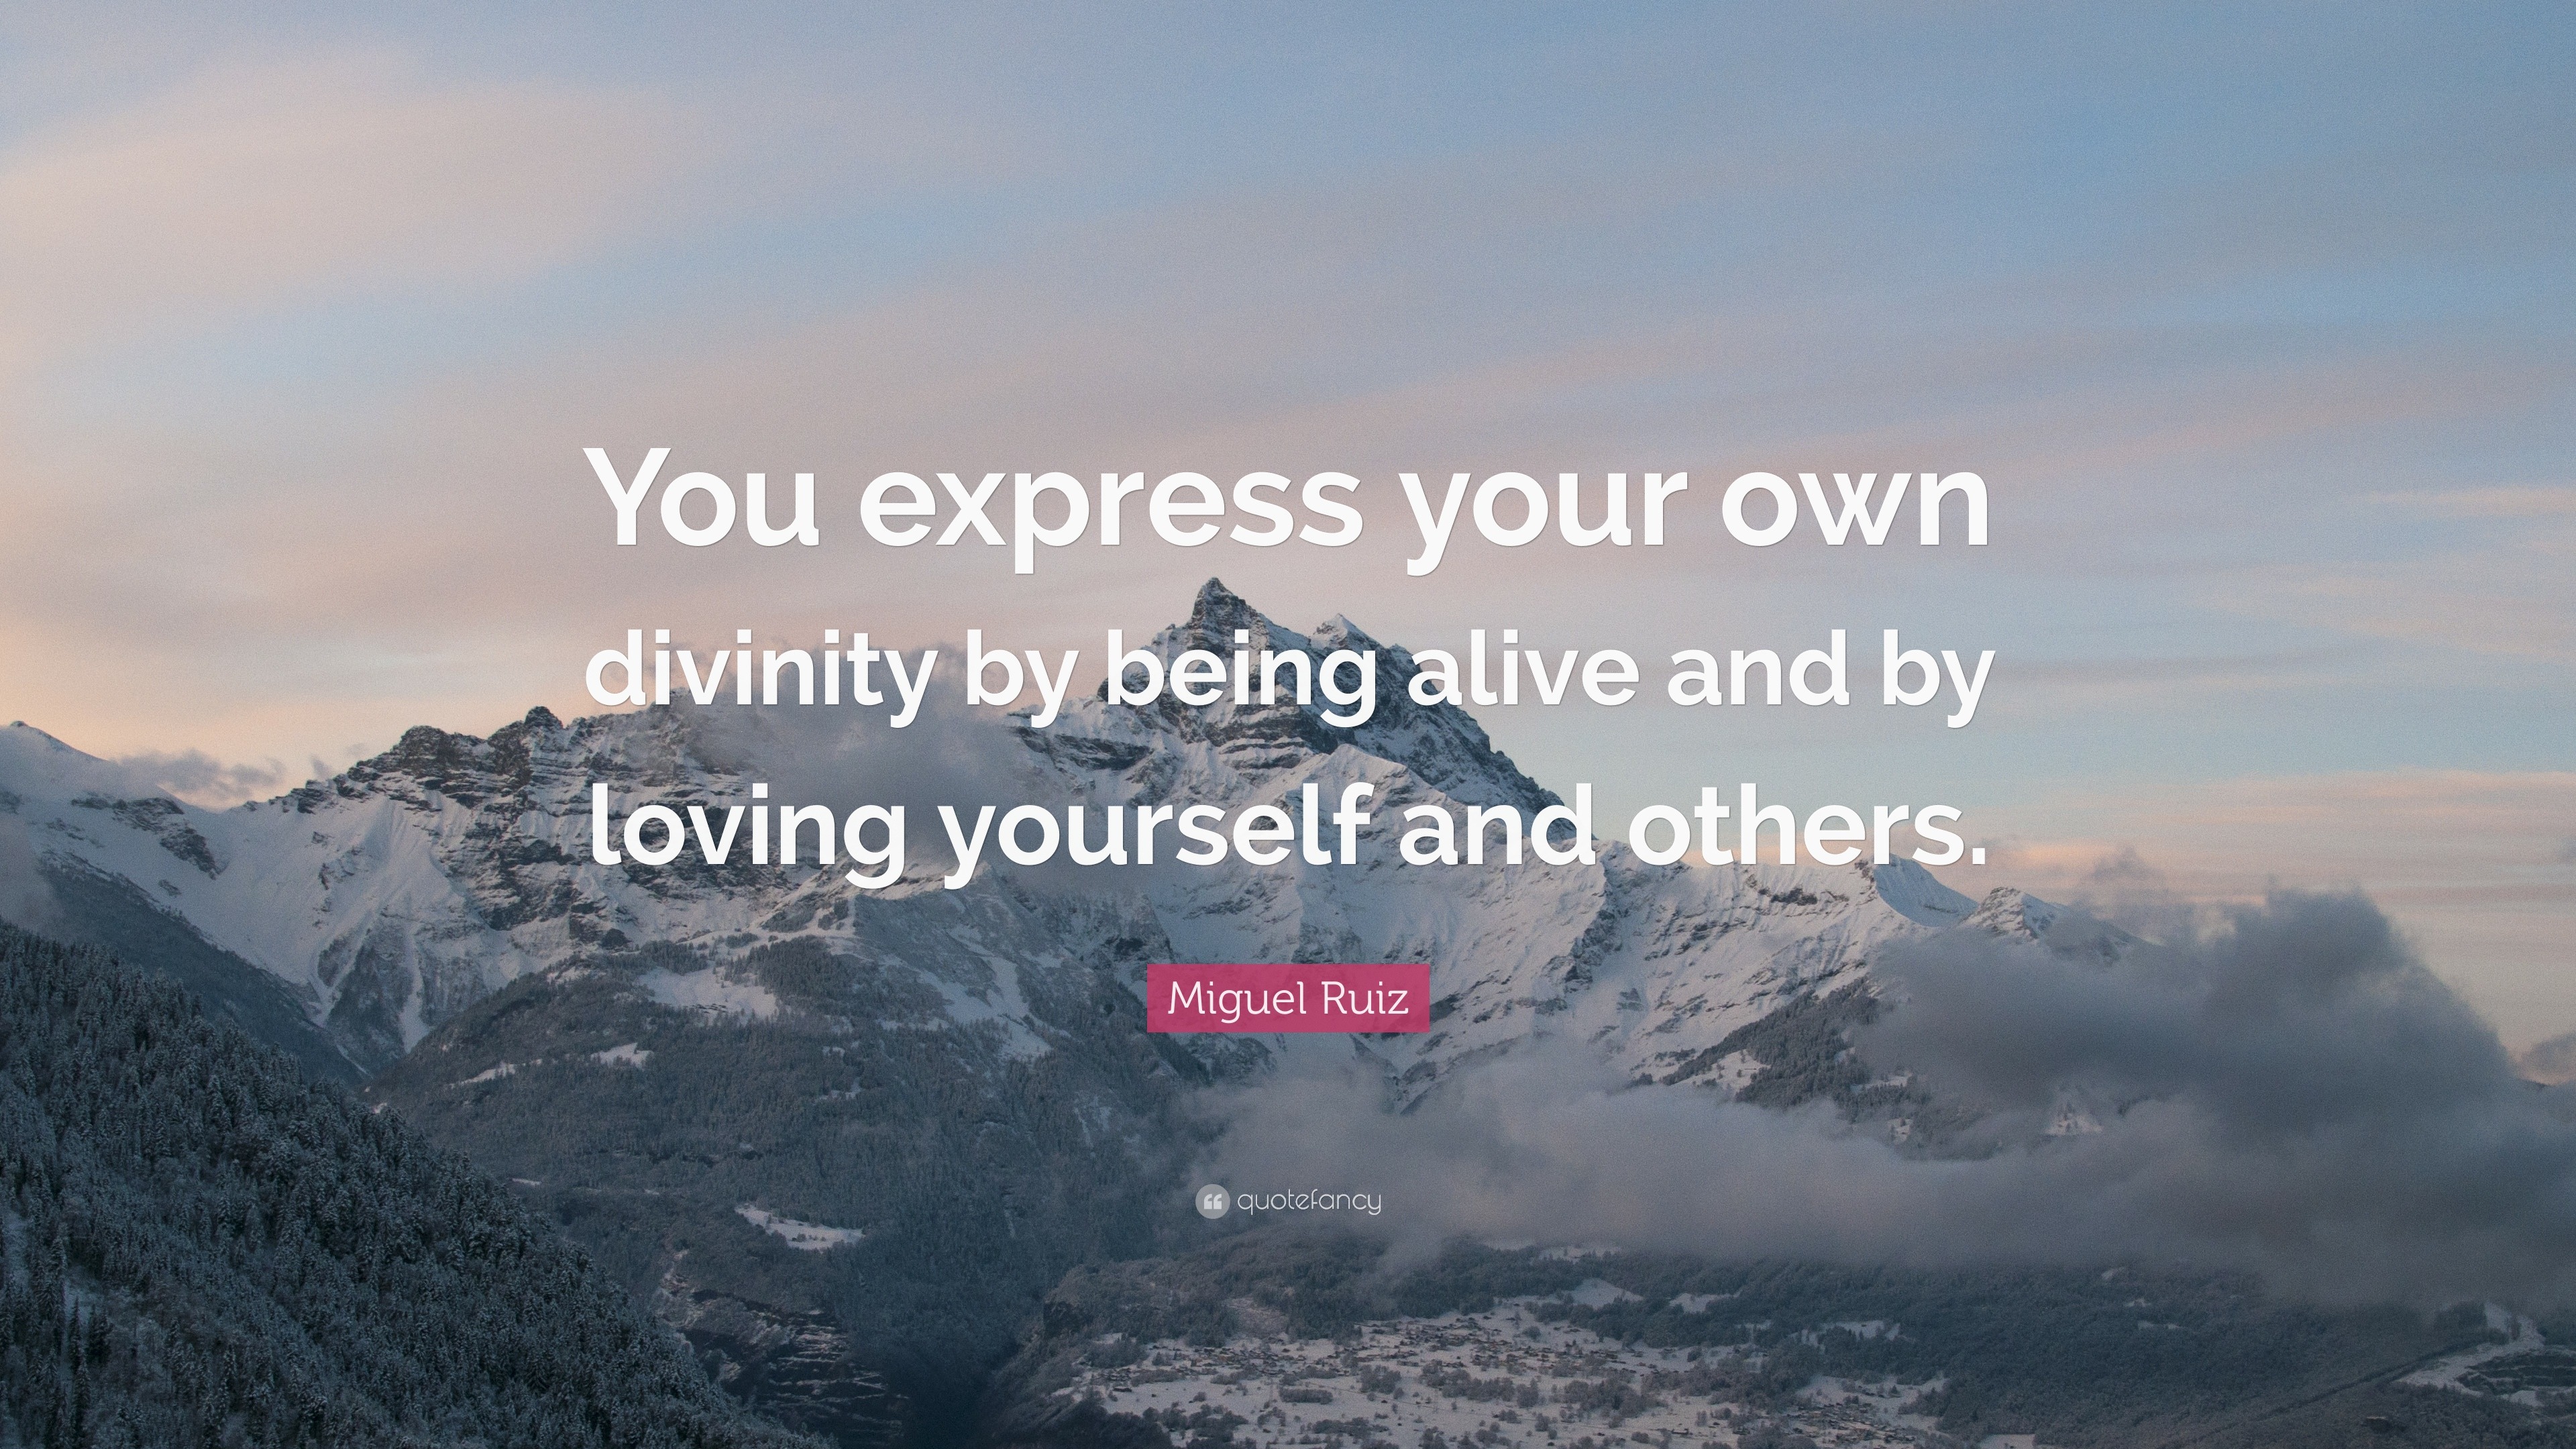 Miguel Ruiz Quote “you Express Your Own Divinity By Being Alive And By Loving Yourself And Others” 1197